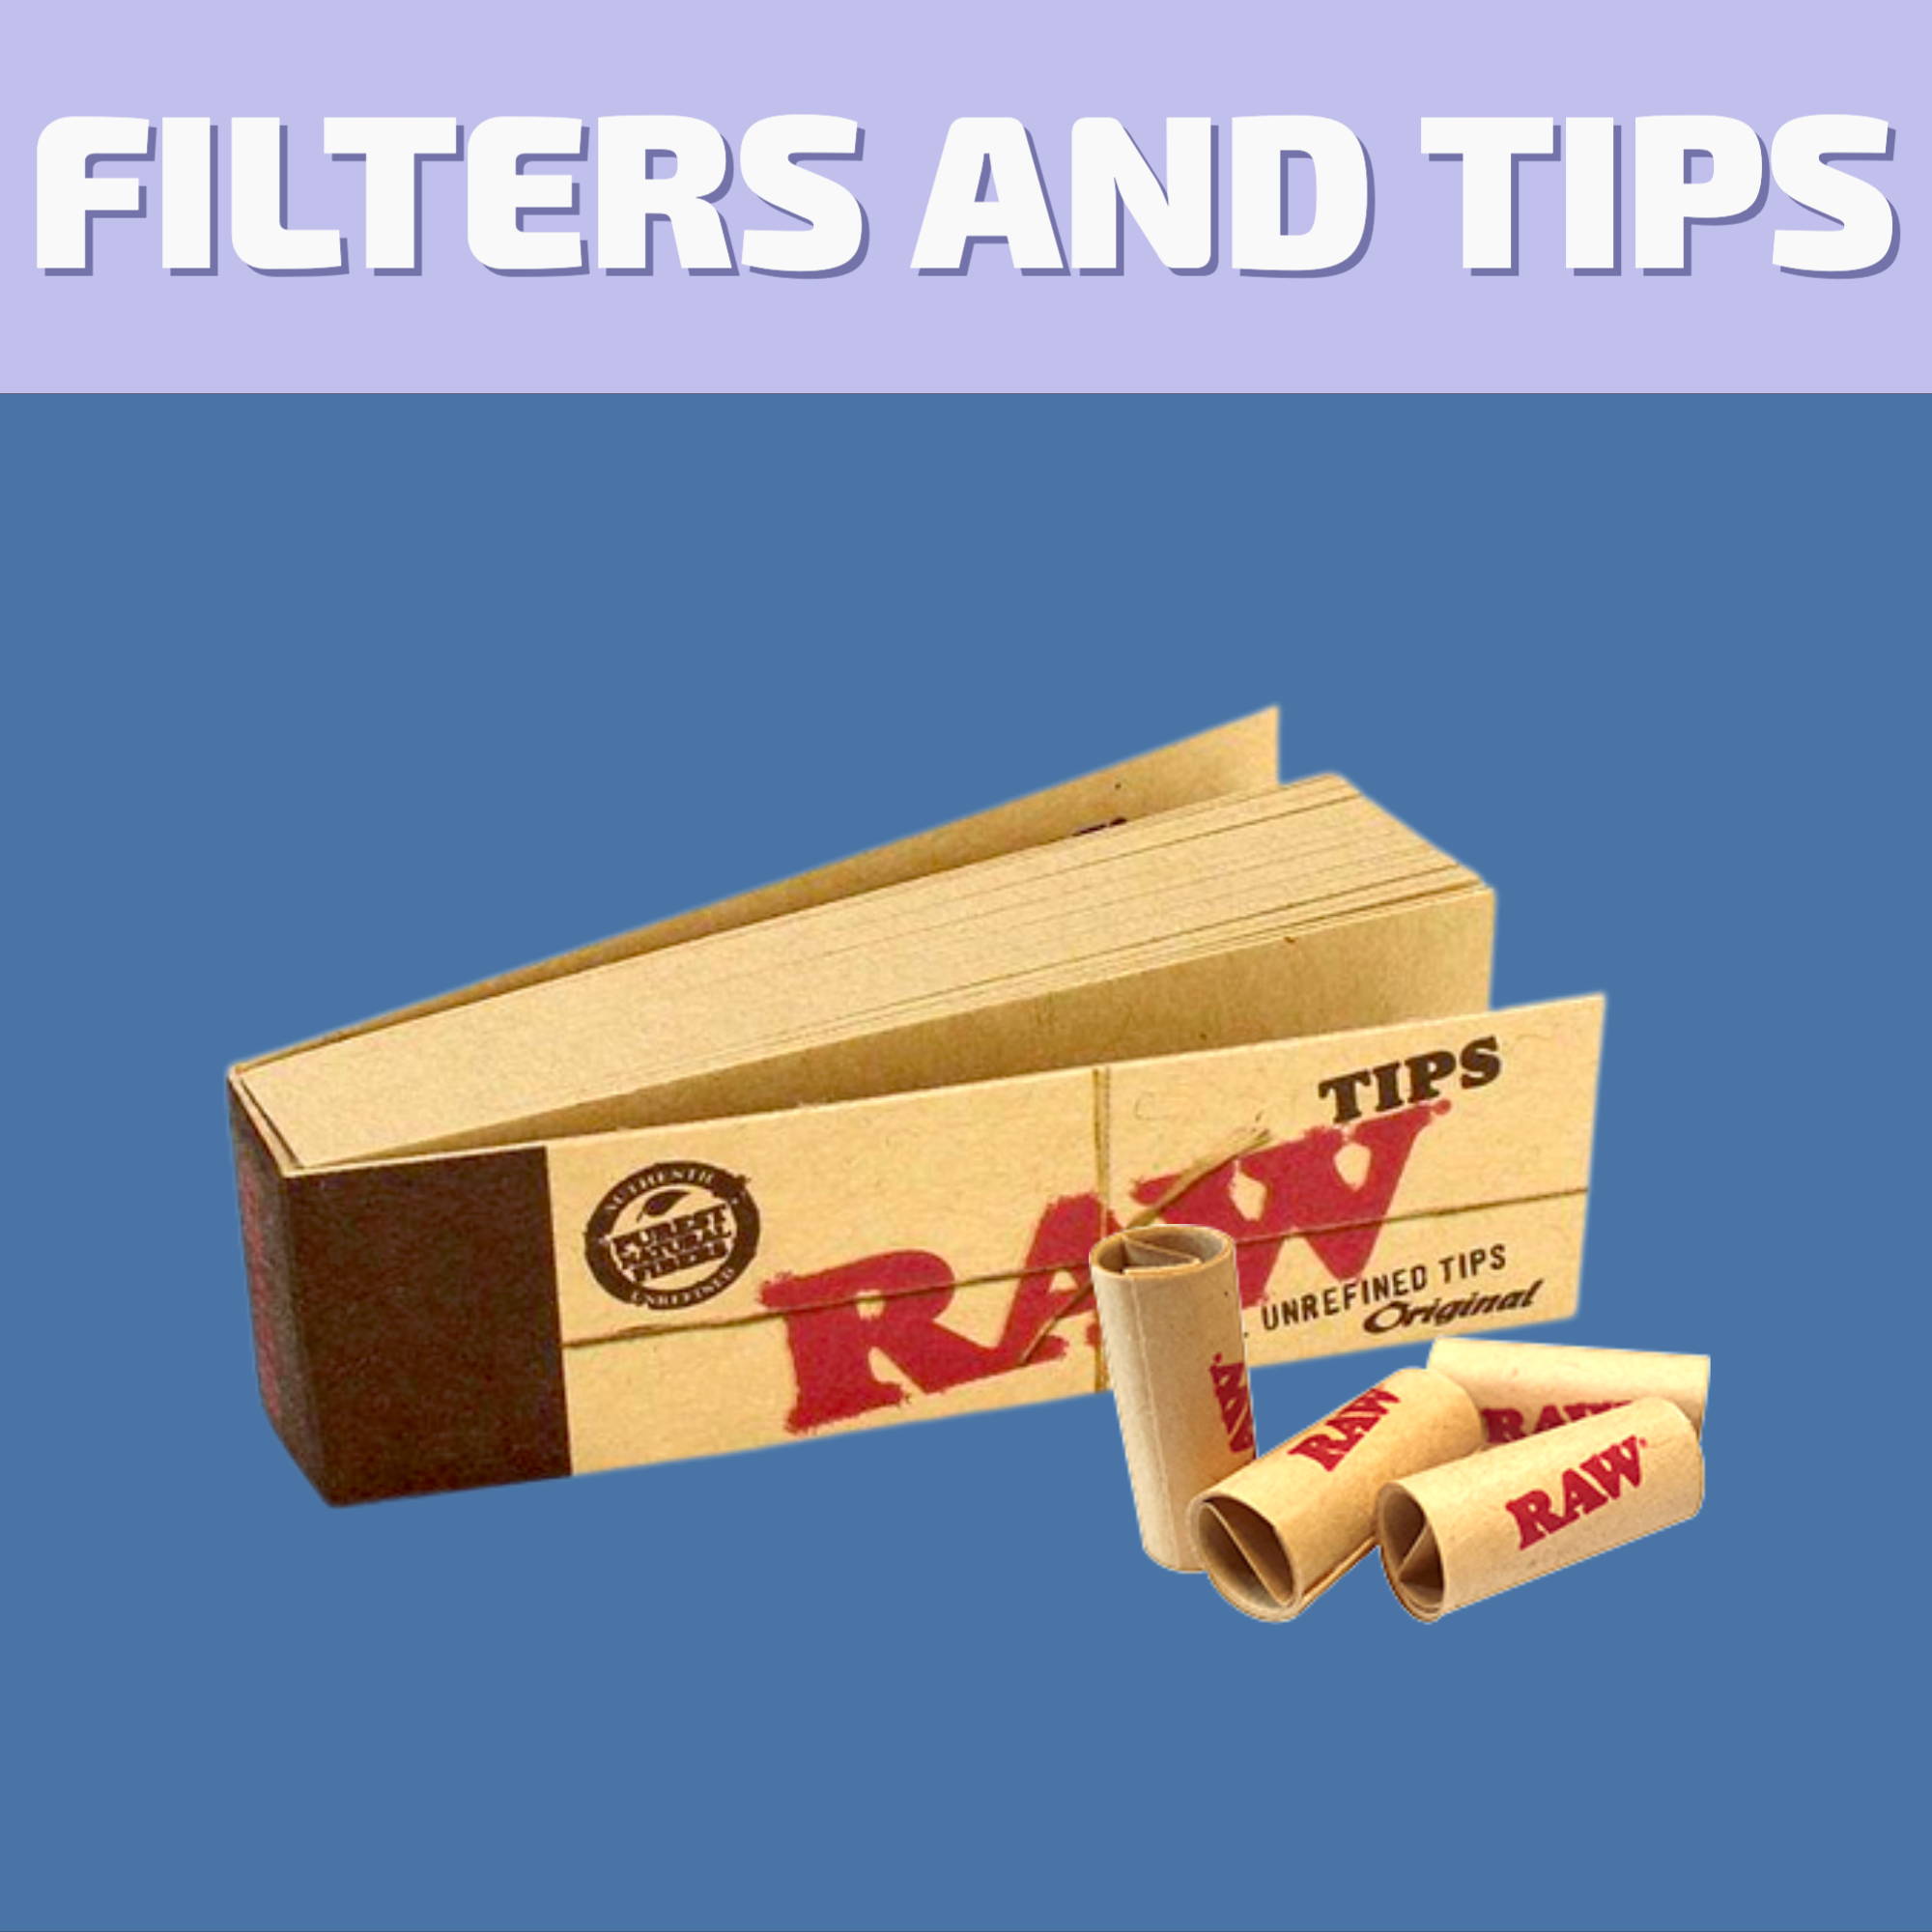 Shop our selection of Filters and Tips for same day delivery in Winnipeg or visit our cannabis store on 580 Academy Road.